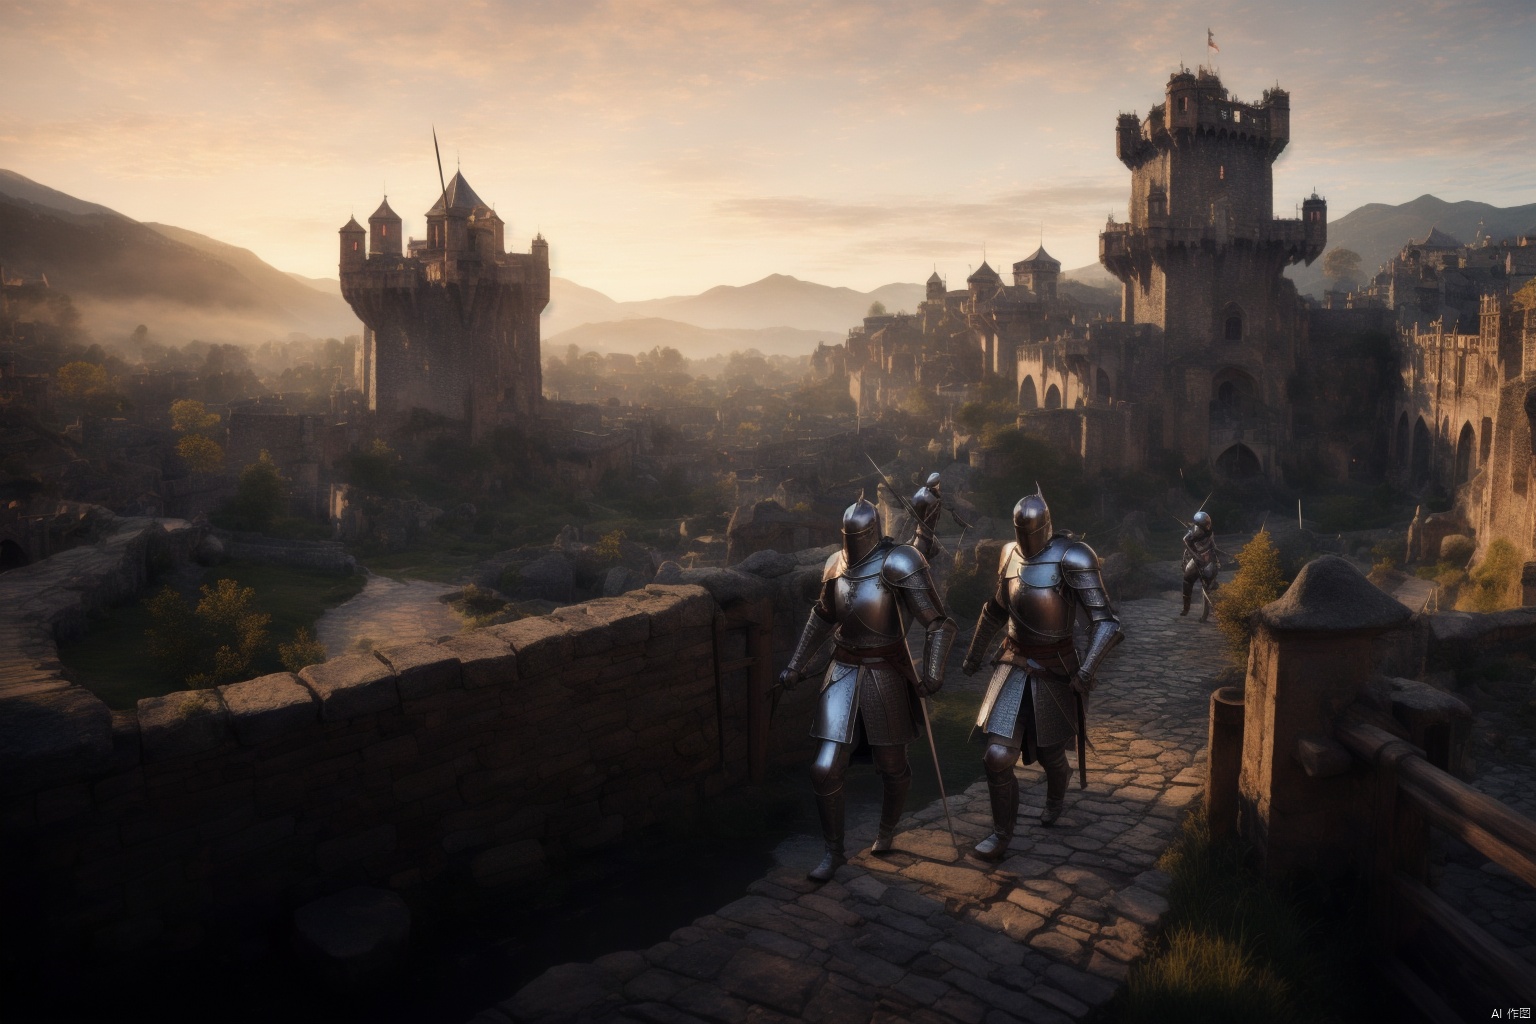 A wide-angle, slightly aerial view of a majestic European medieval castle at dusk. The castle is surrounded by a moat and features towering stone walls with turrets silhouetted against an orange-yellow sky. A pair of armored knights, each wearing a steel helmet and carrying a lance, confidently emerge from an open gate along a cobblestone path. Their cloaks billow behind them, conveying a sense of motion and determination. The castle's architecture is intricate with visible arches and arrow slits, while distant mountains add depth to the scene. The soft lighting of twilight bathes the knights and the surrounding landscape in warm gold hues, ancient architecture